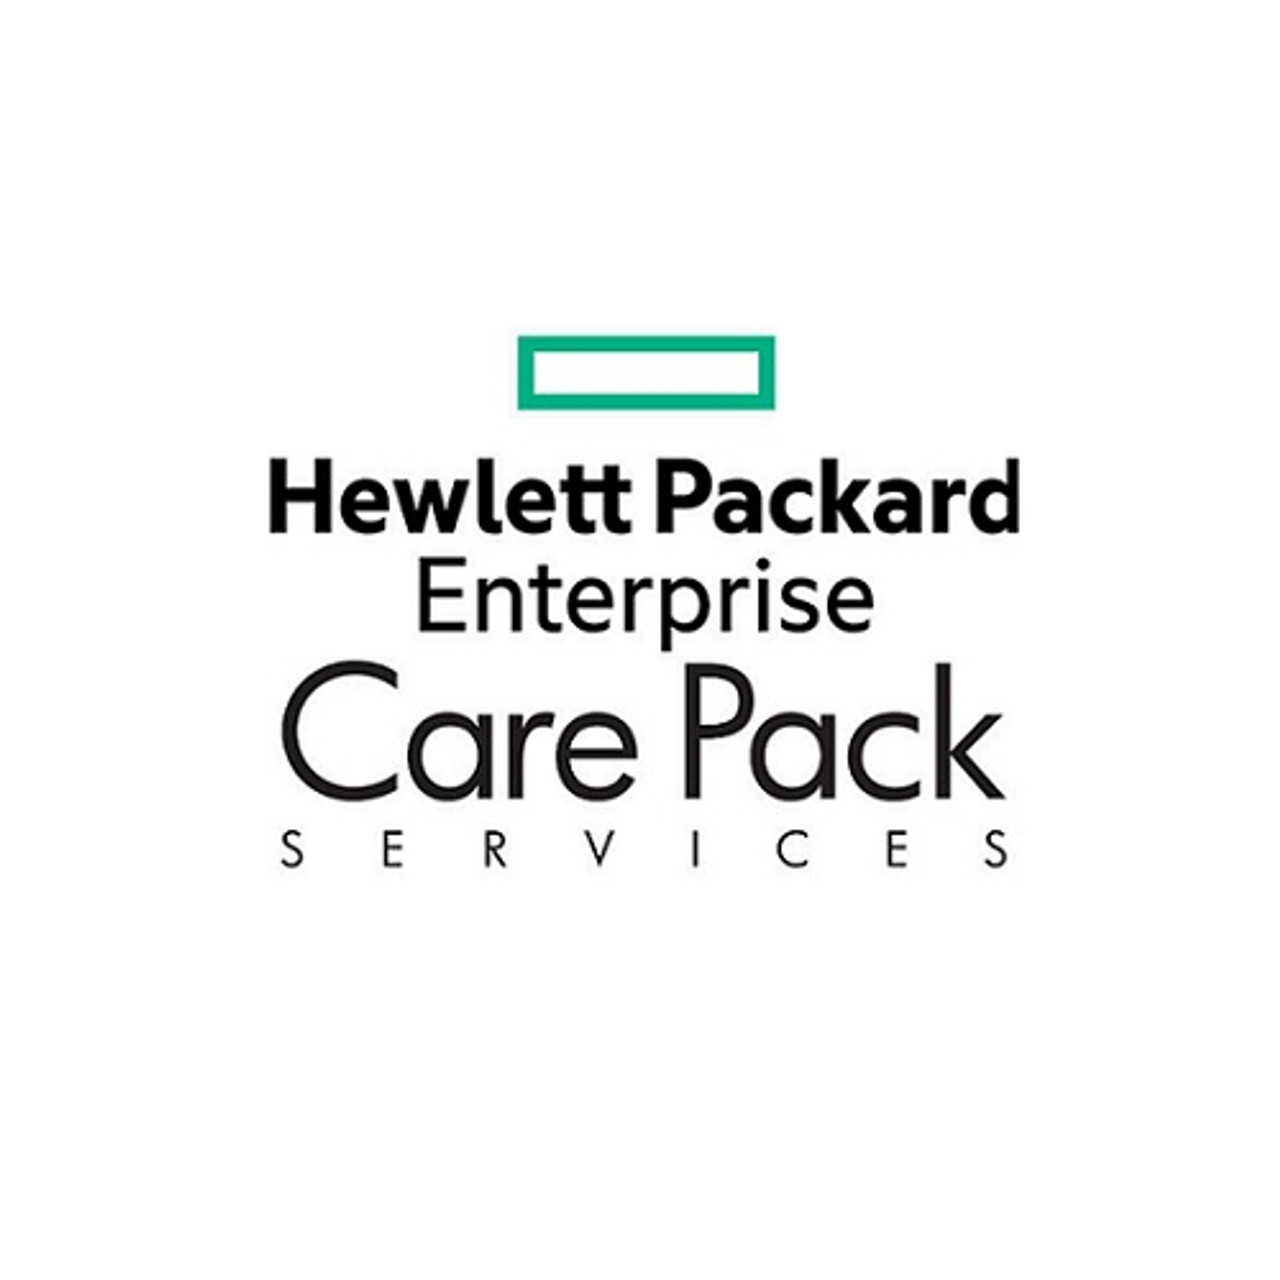 HPE 1 Year Post Warranty Foundation Care CTR wDMR DL360p Gen8 IC Service